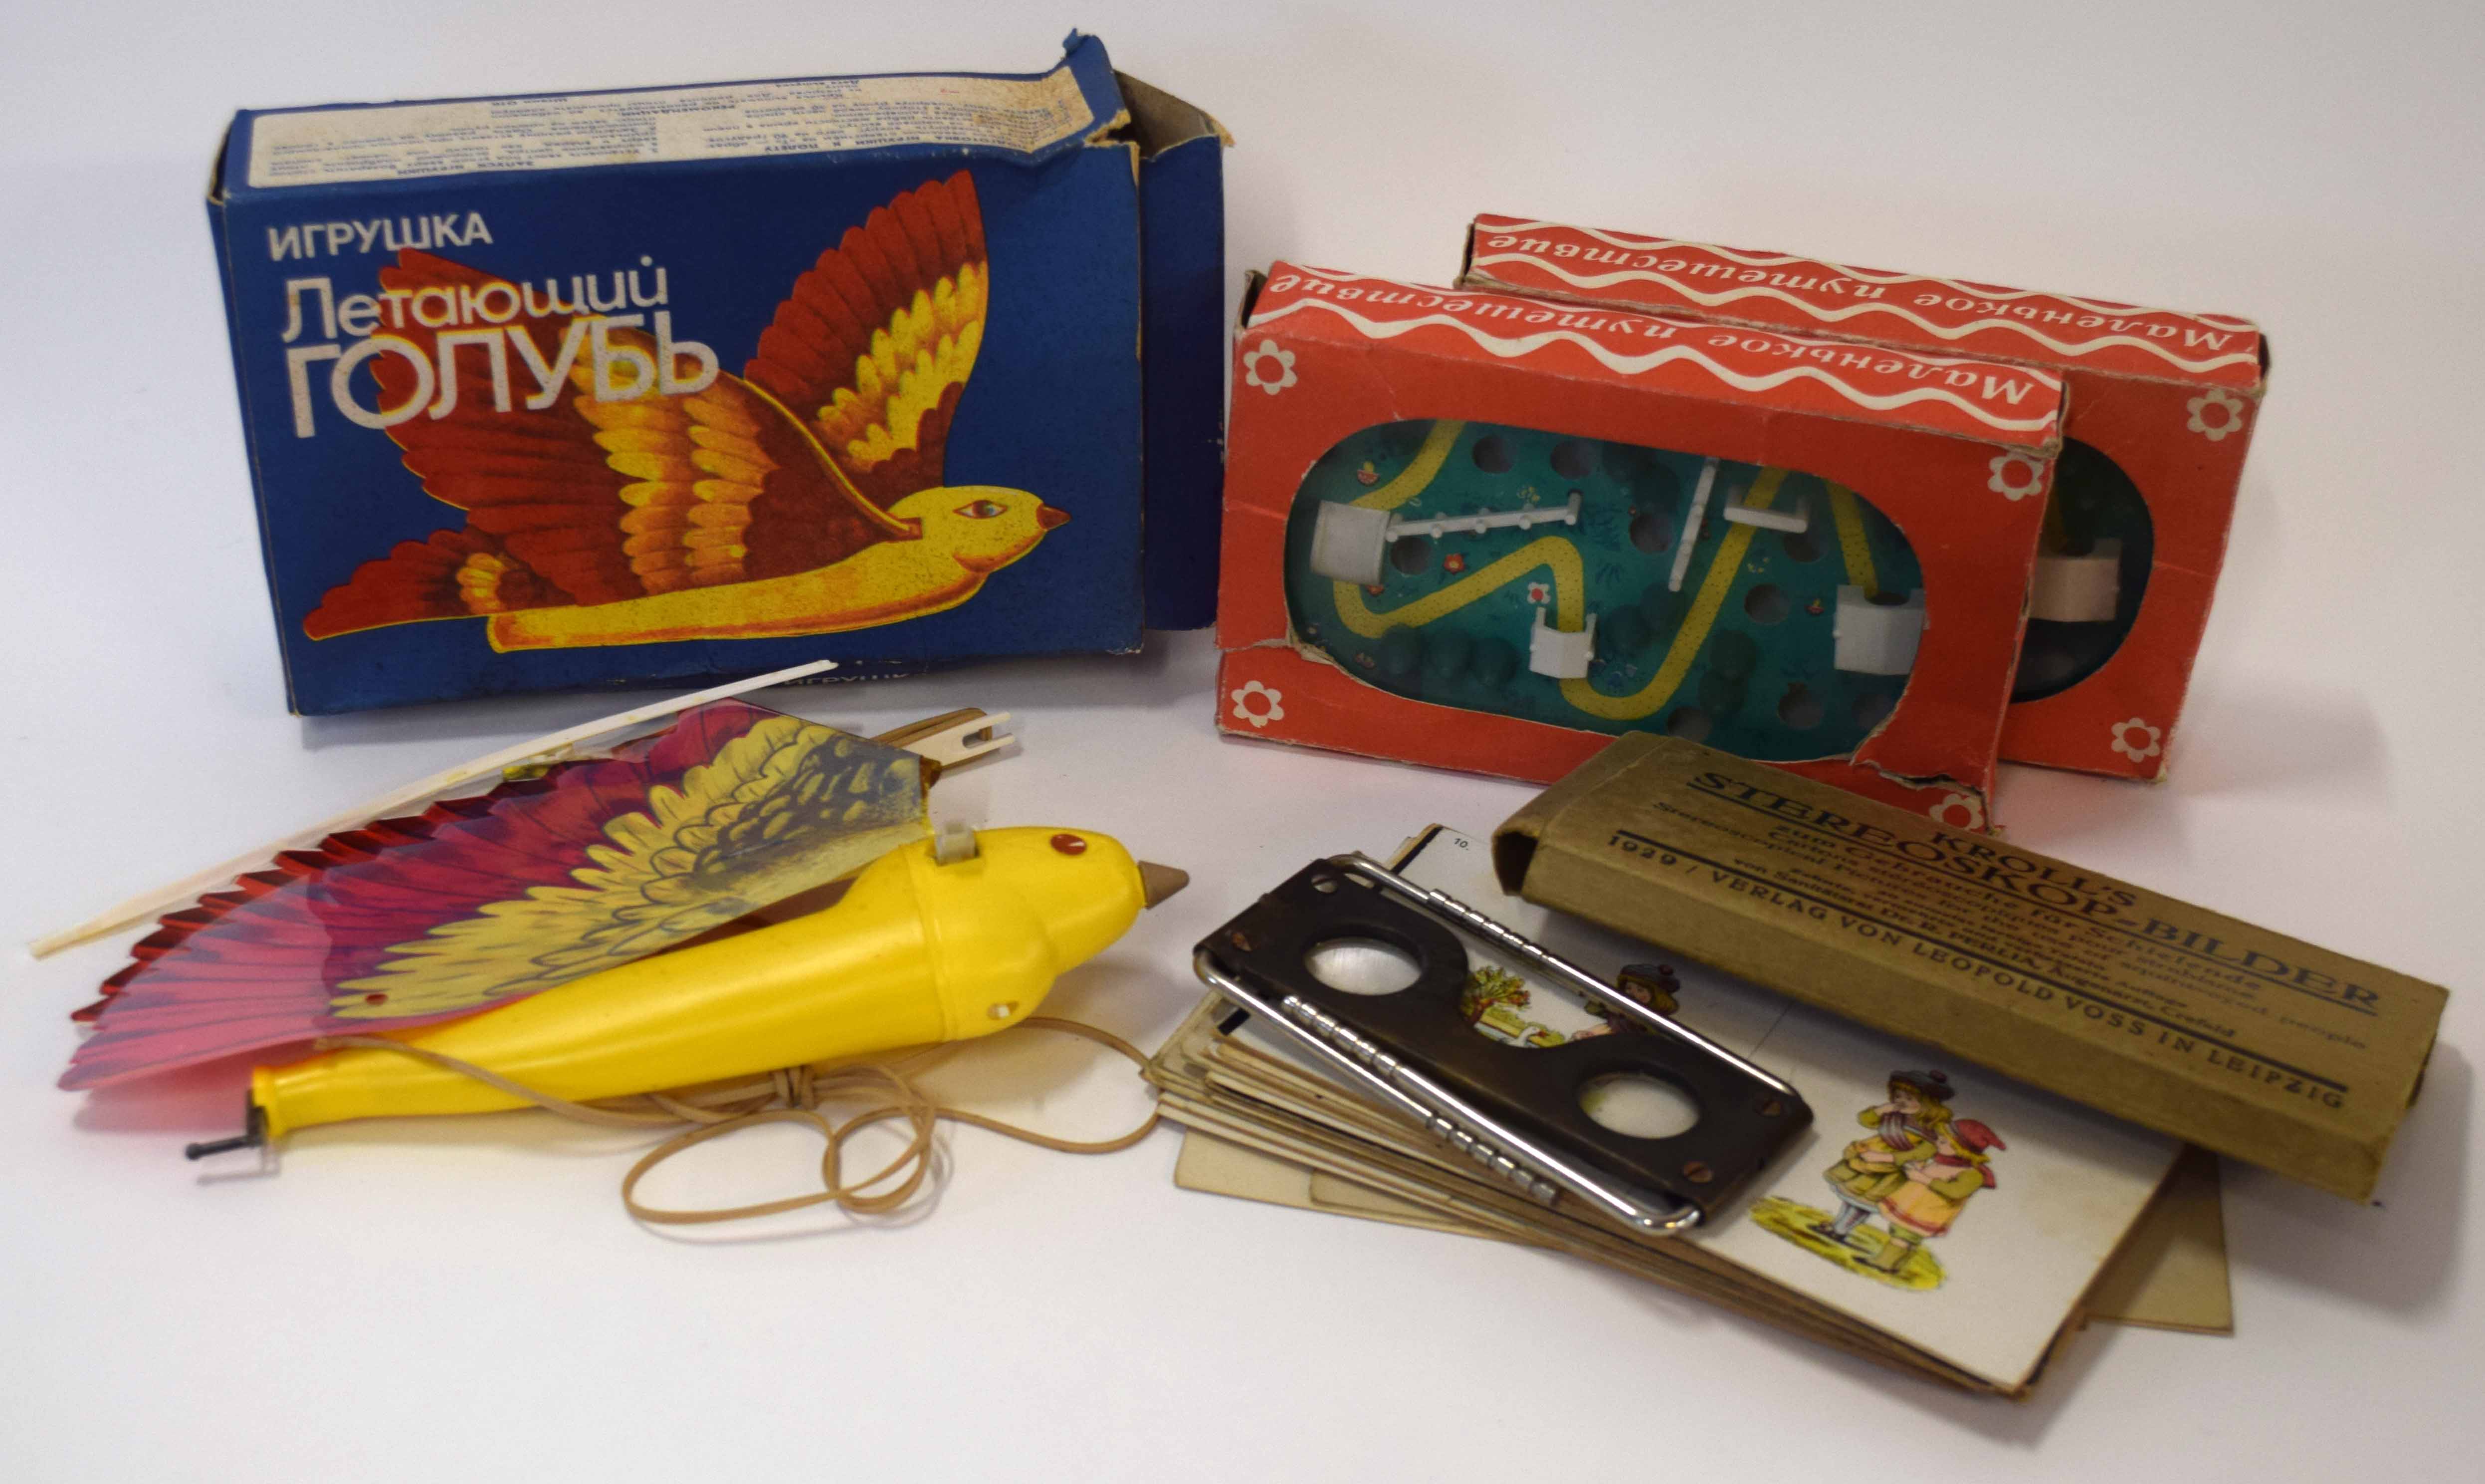 1950s/1960s Russian flying bird toy in original box with instructions, together with two pinball